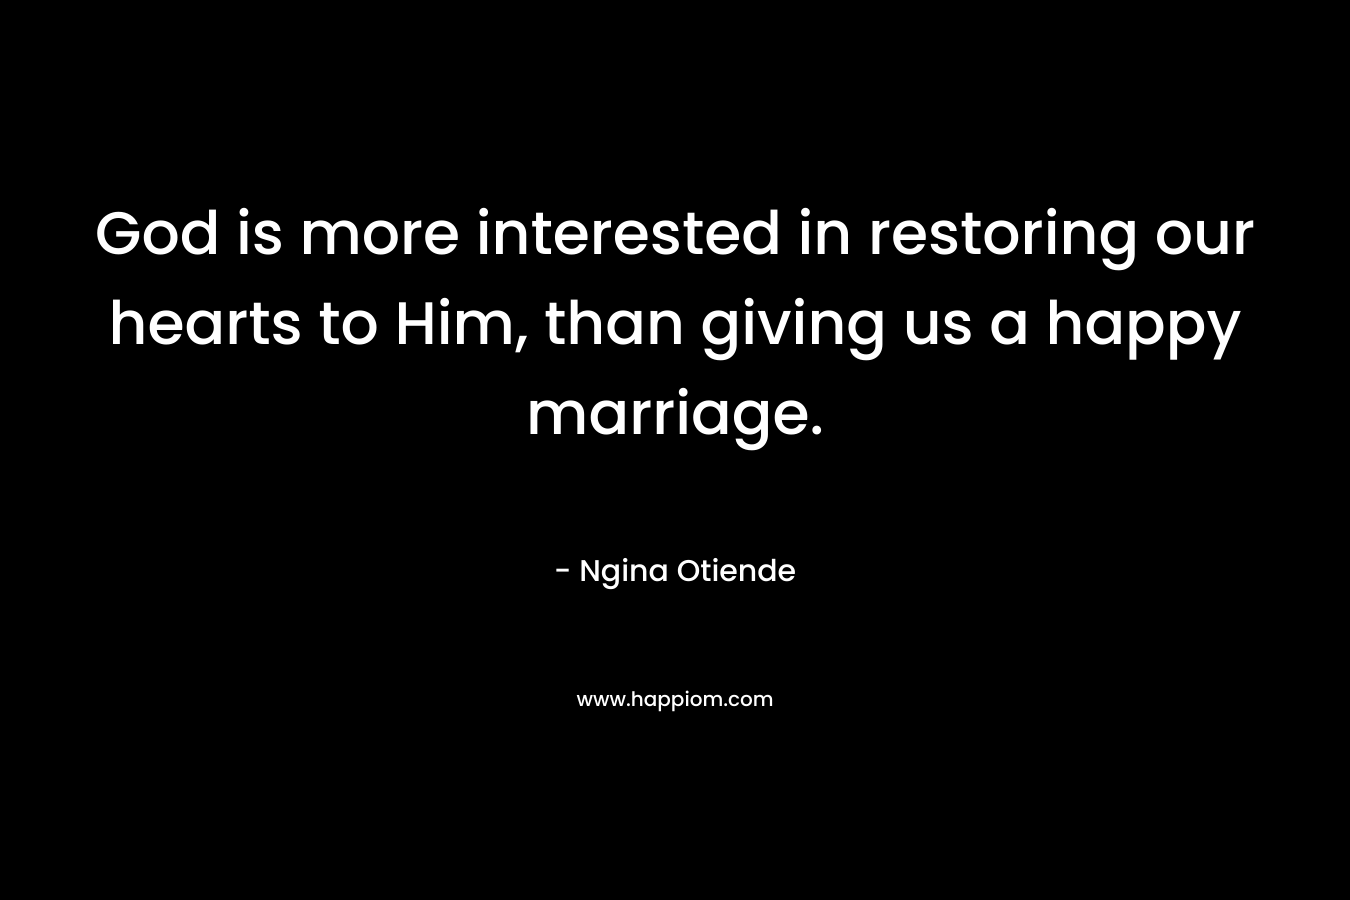 God is more interested in restoring our hearts to Him, than giving us a happy marriage.